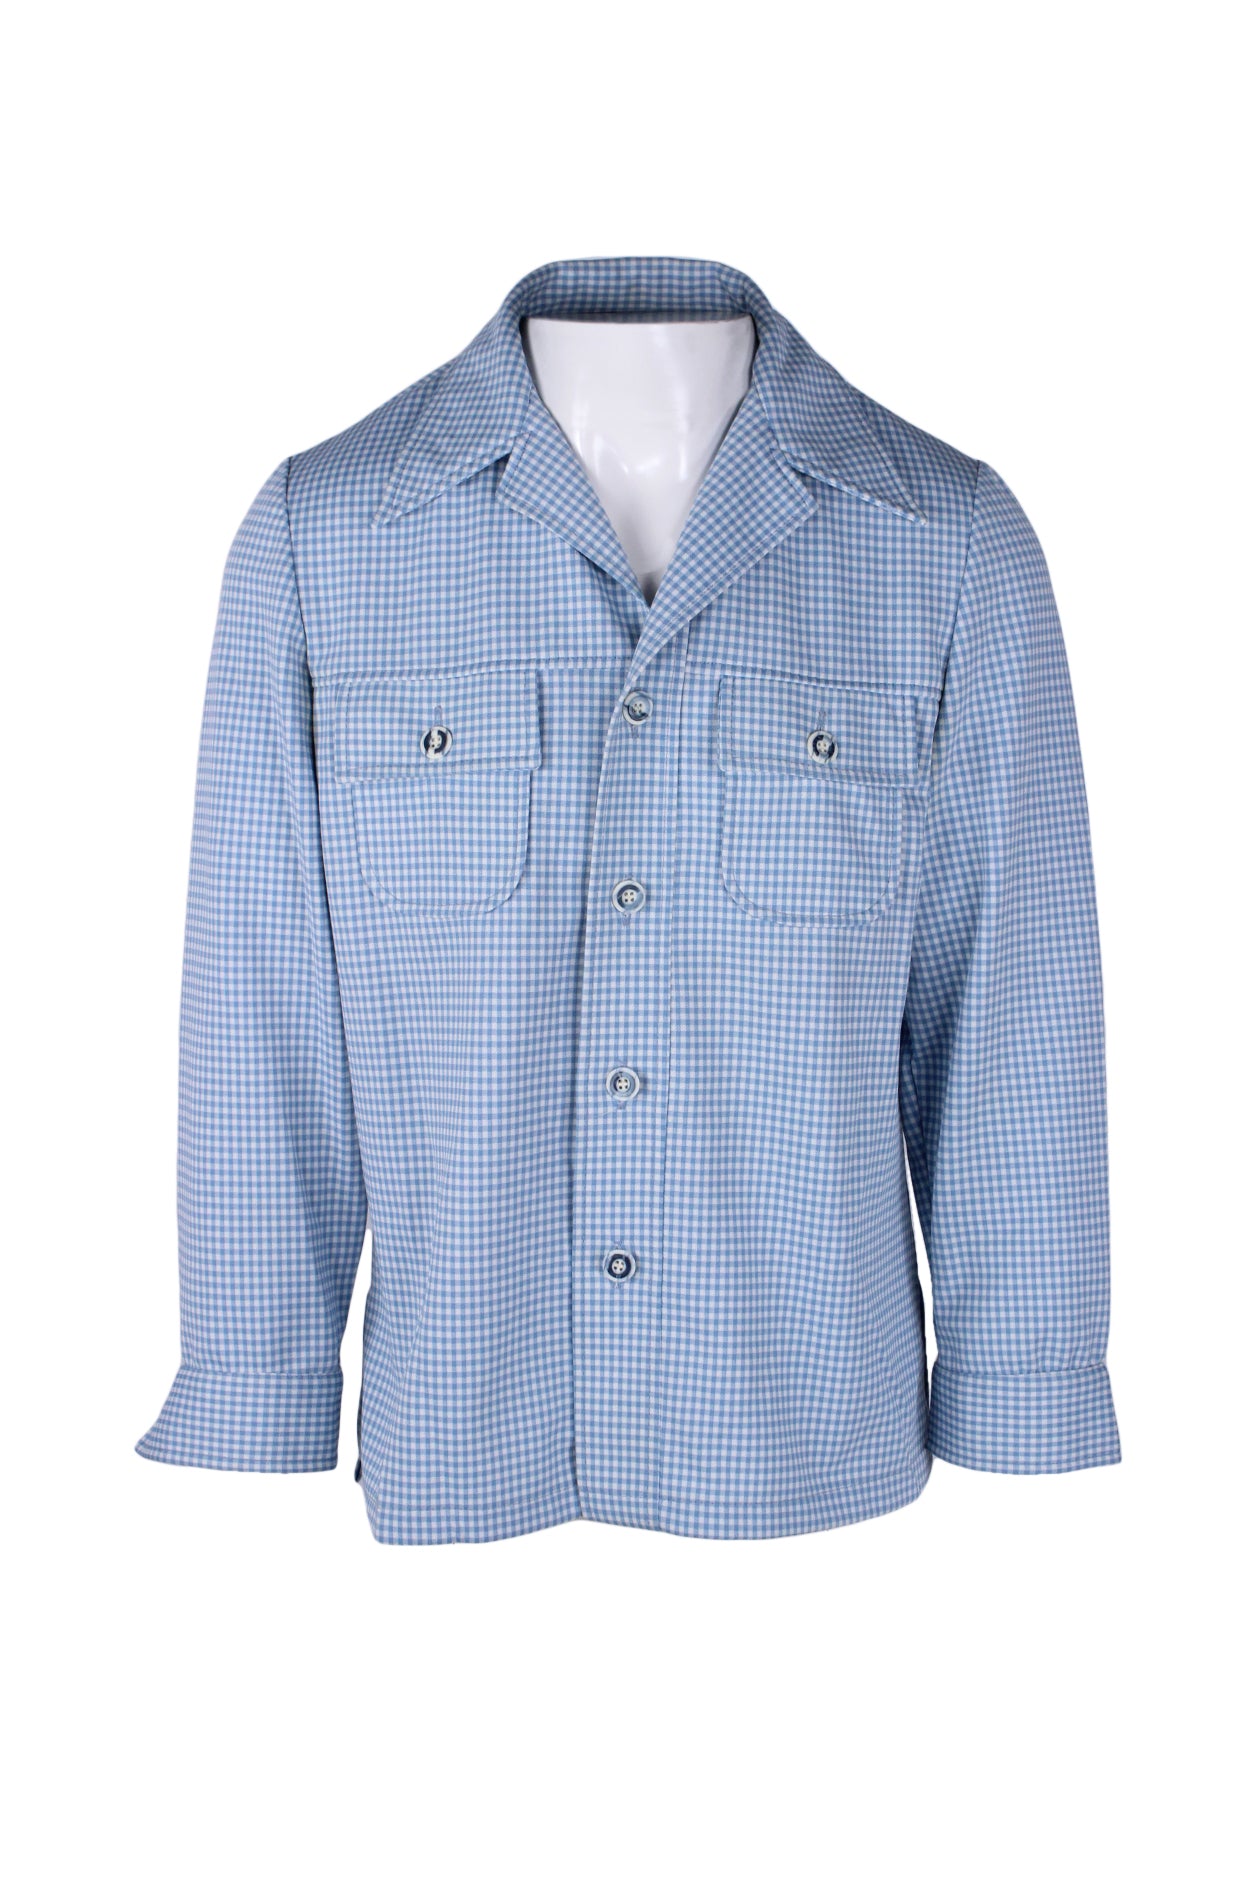 description: vintage haggar check plaid blue tones long sleeve shirt jacket. features collar, button down closure at center front, two flap patch pockets at front, loose fit, and cuffed long sleeves. 